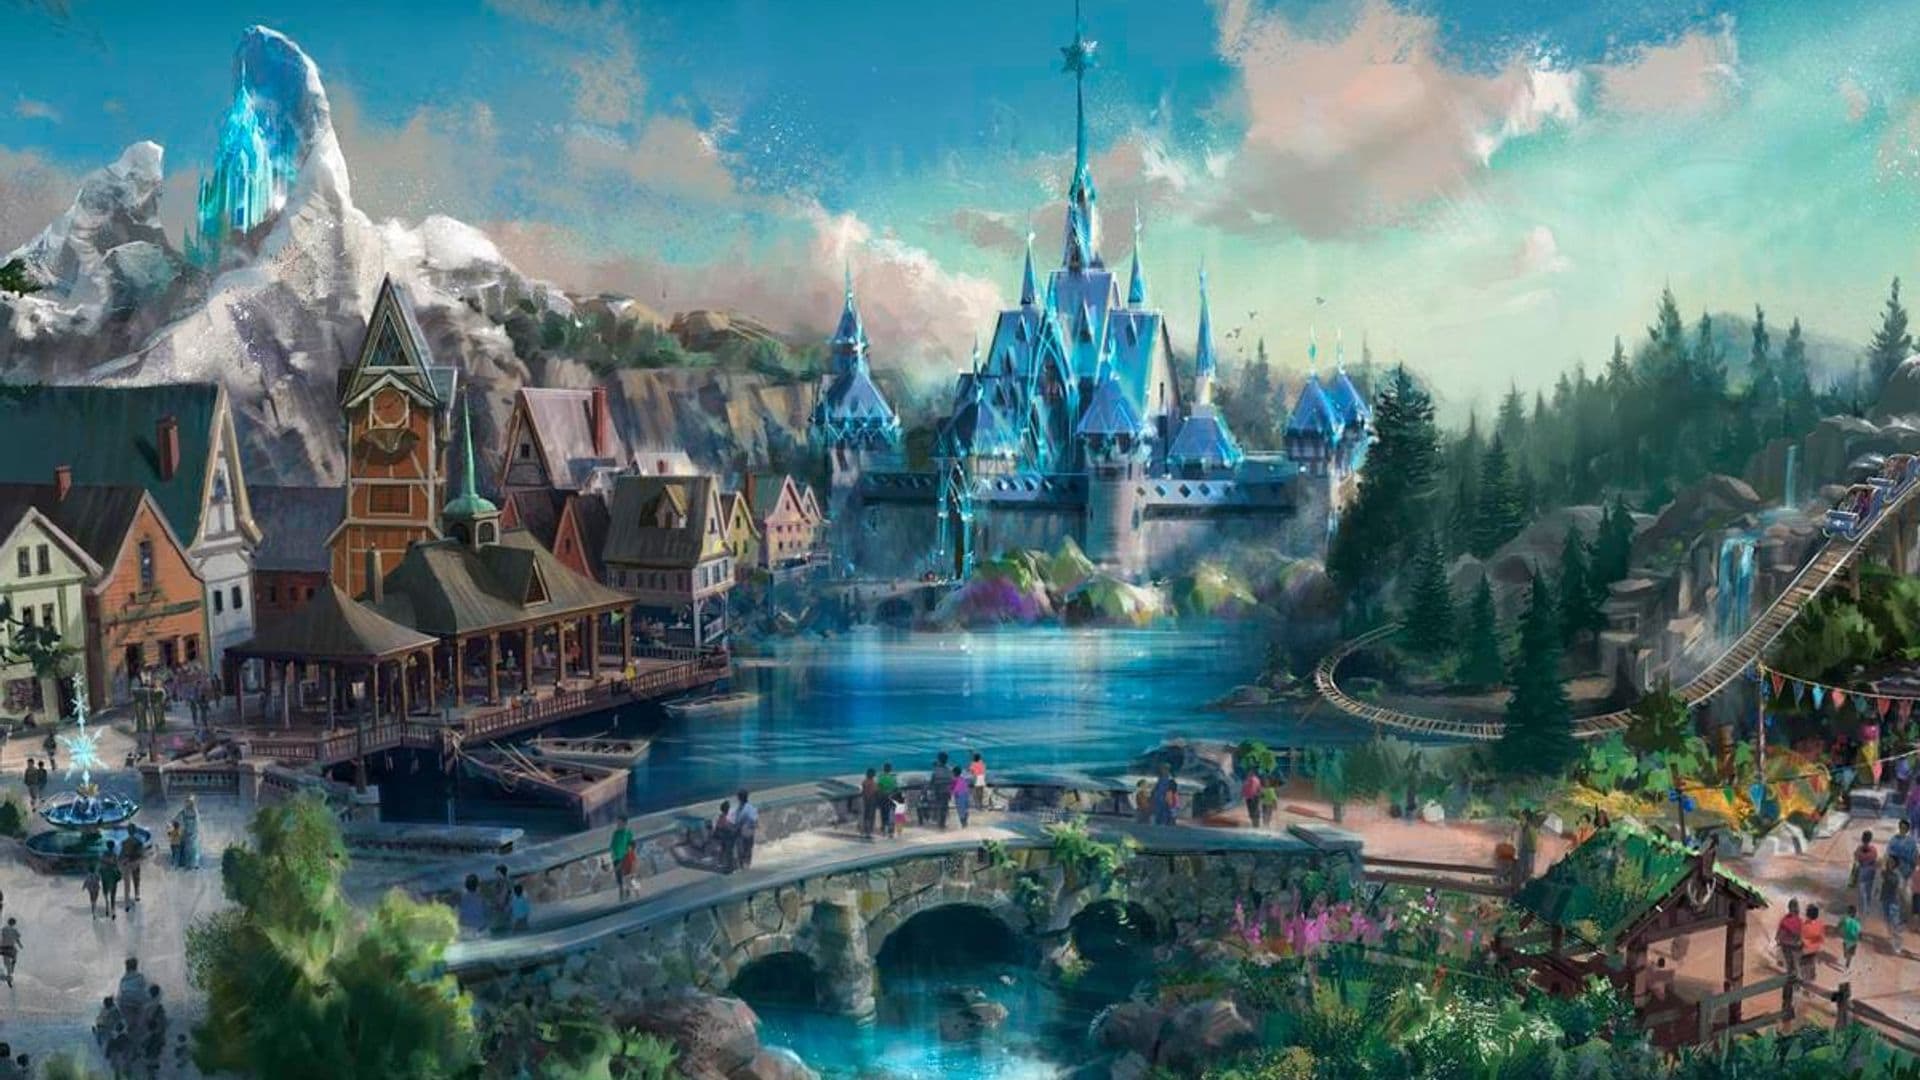 Book a trip to Arendelle! A Frozen-themed land to open at theme park in 2023